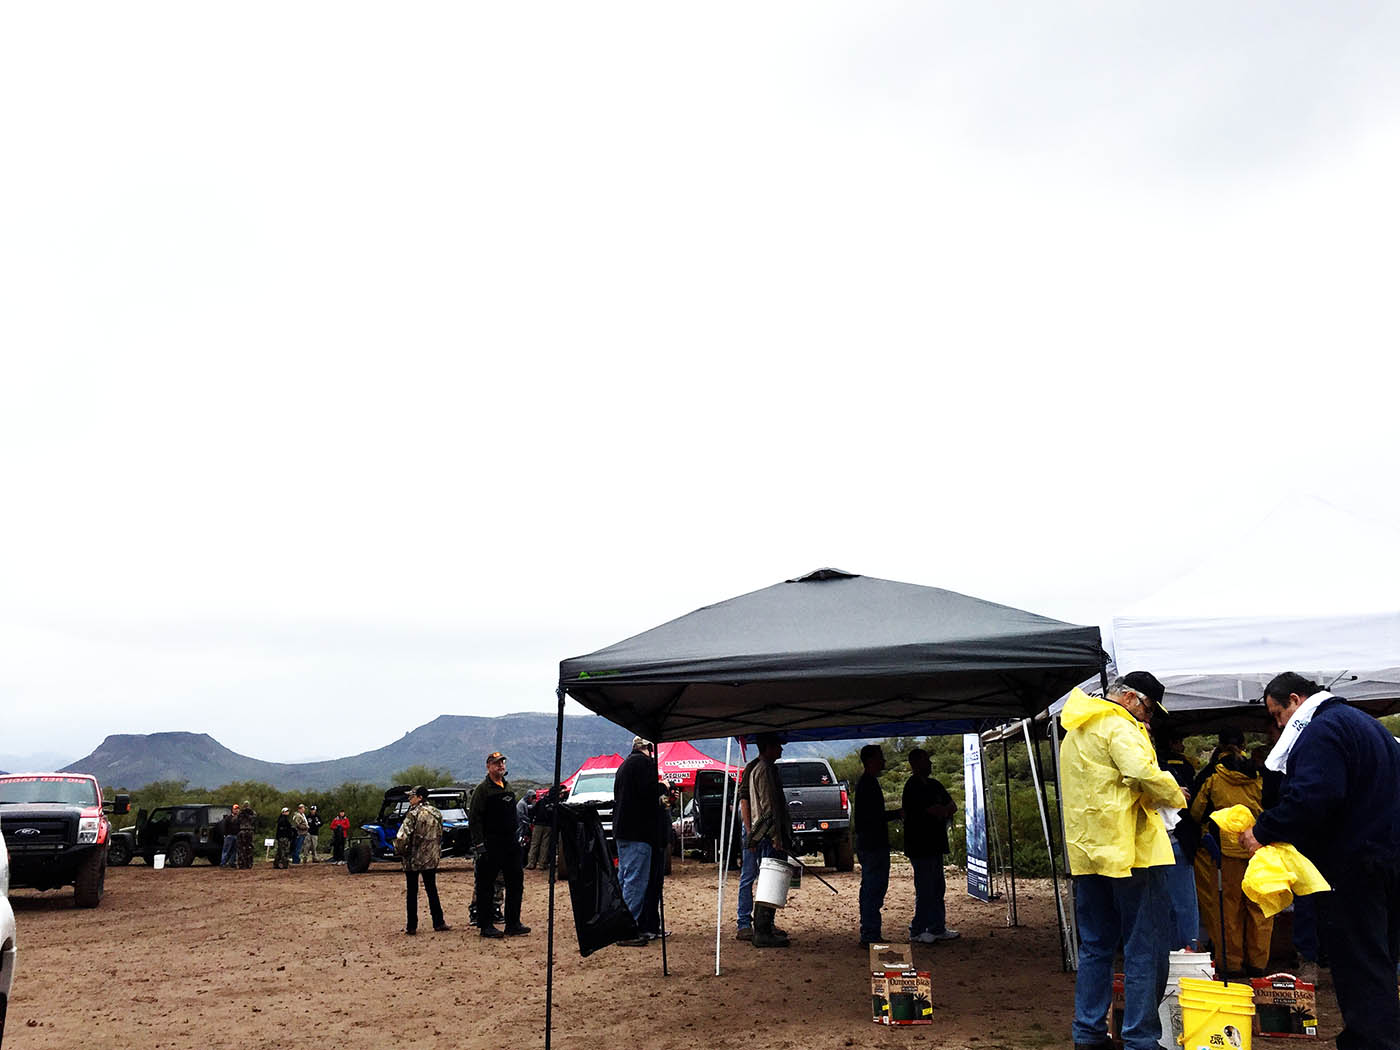 Table Mesa Recreation area cleanup in Arizona with Discount Tire